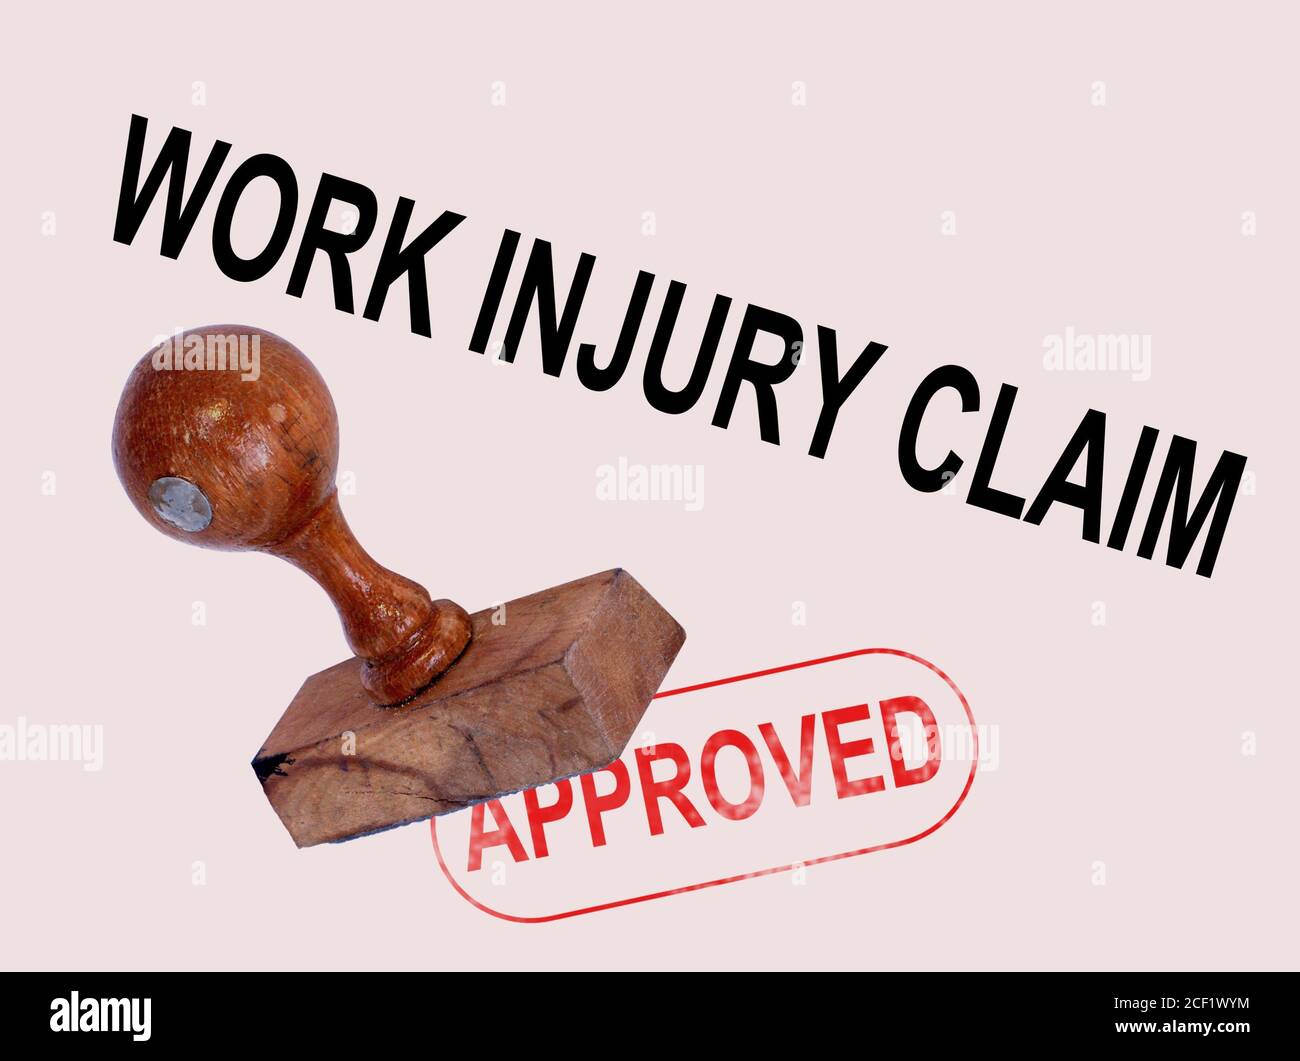 Work Injury Claim Approved Showing Medical Expenses repaid. Stock Photo